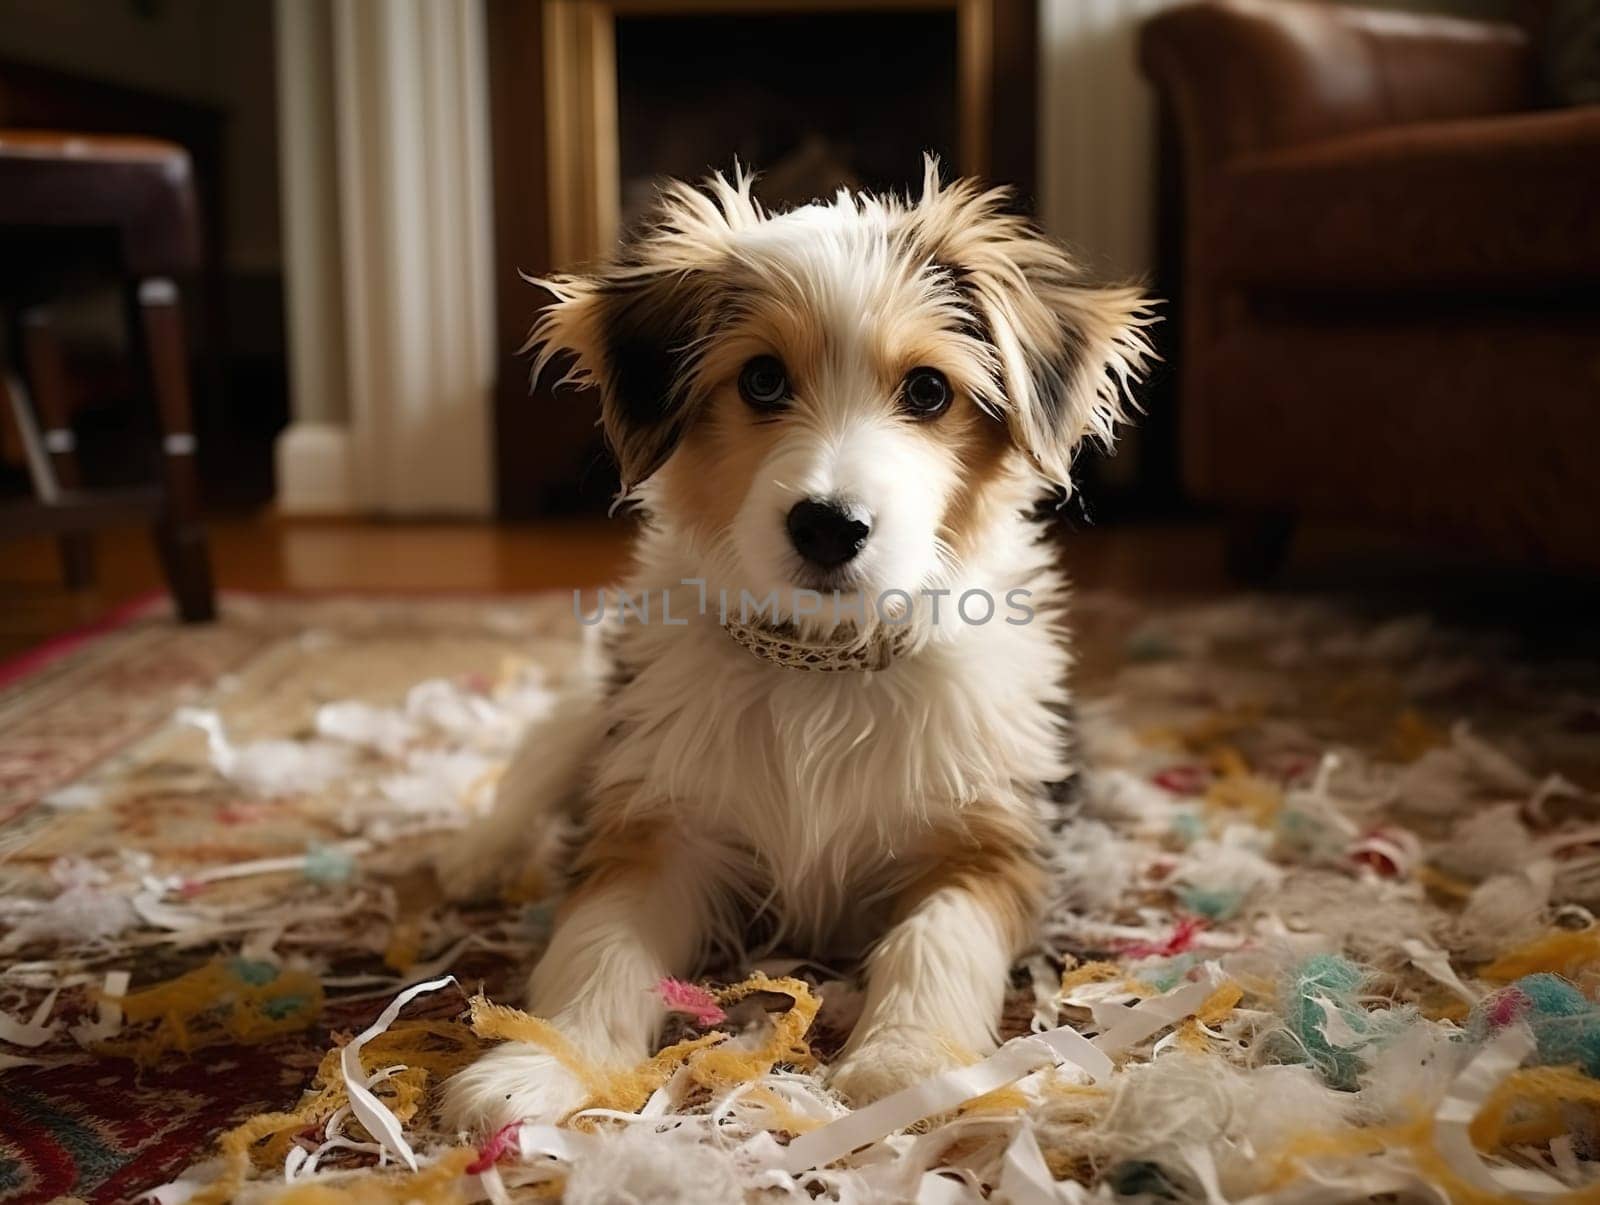 Cute Little Fluffy Puppy Made A Mess In The Living Room